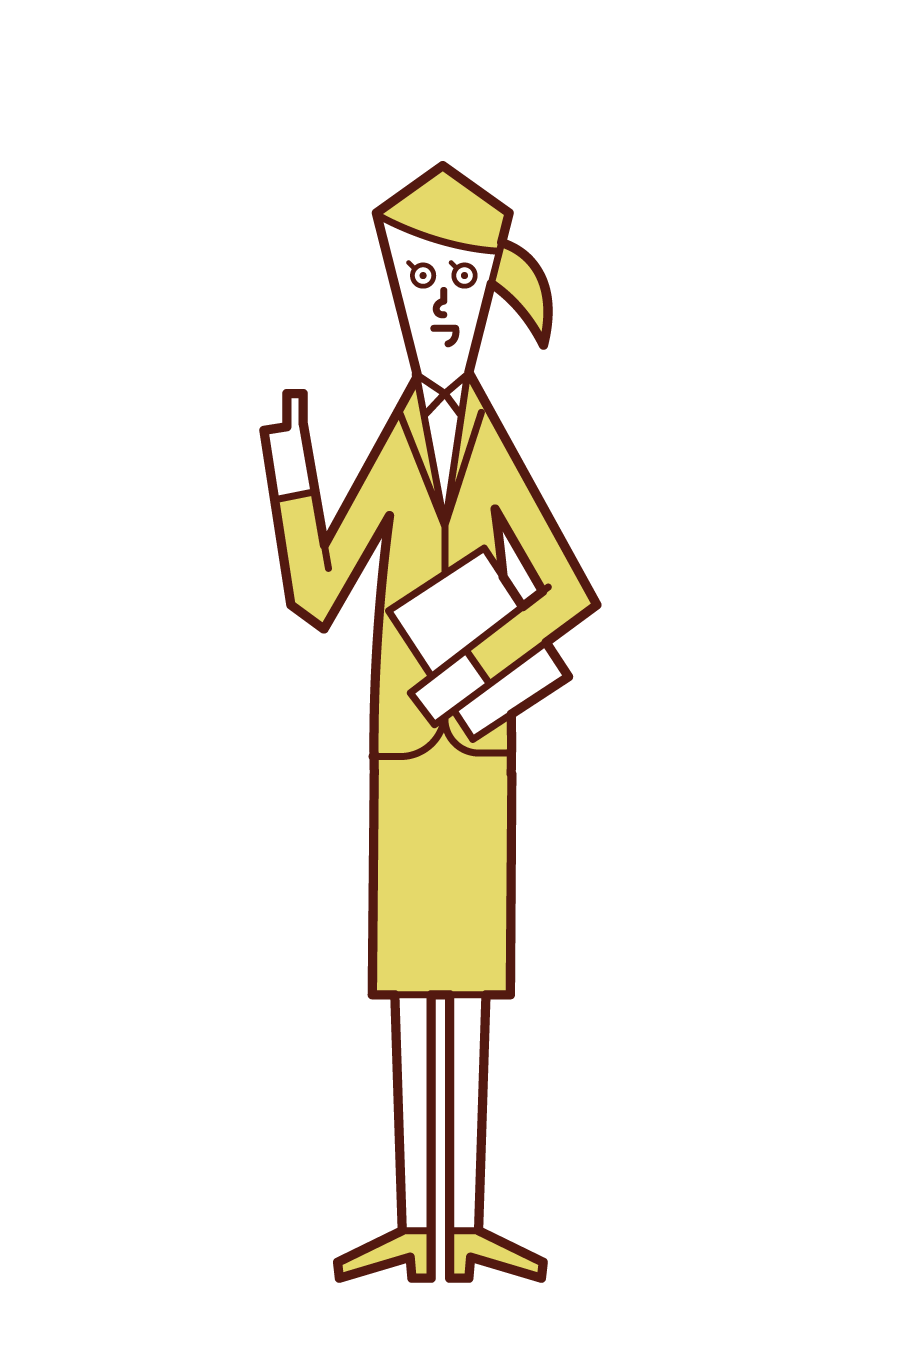 Illustration of a woman who speaks